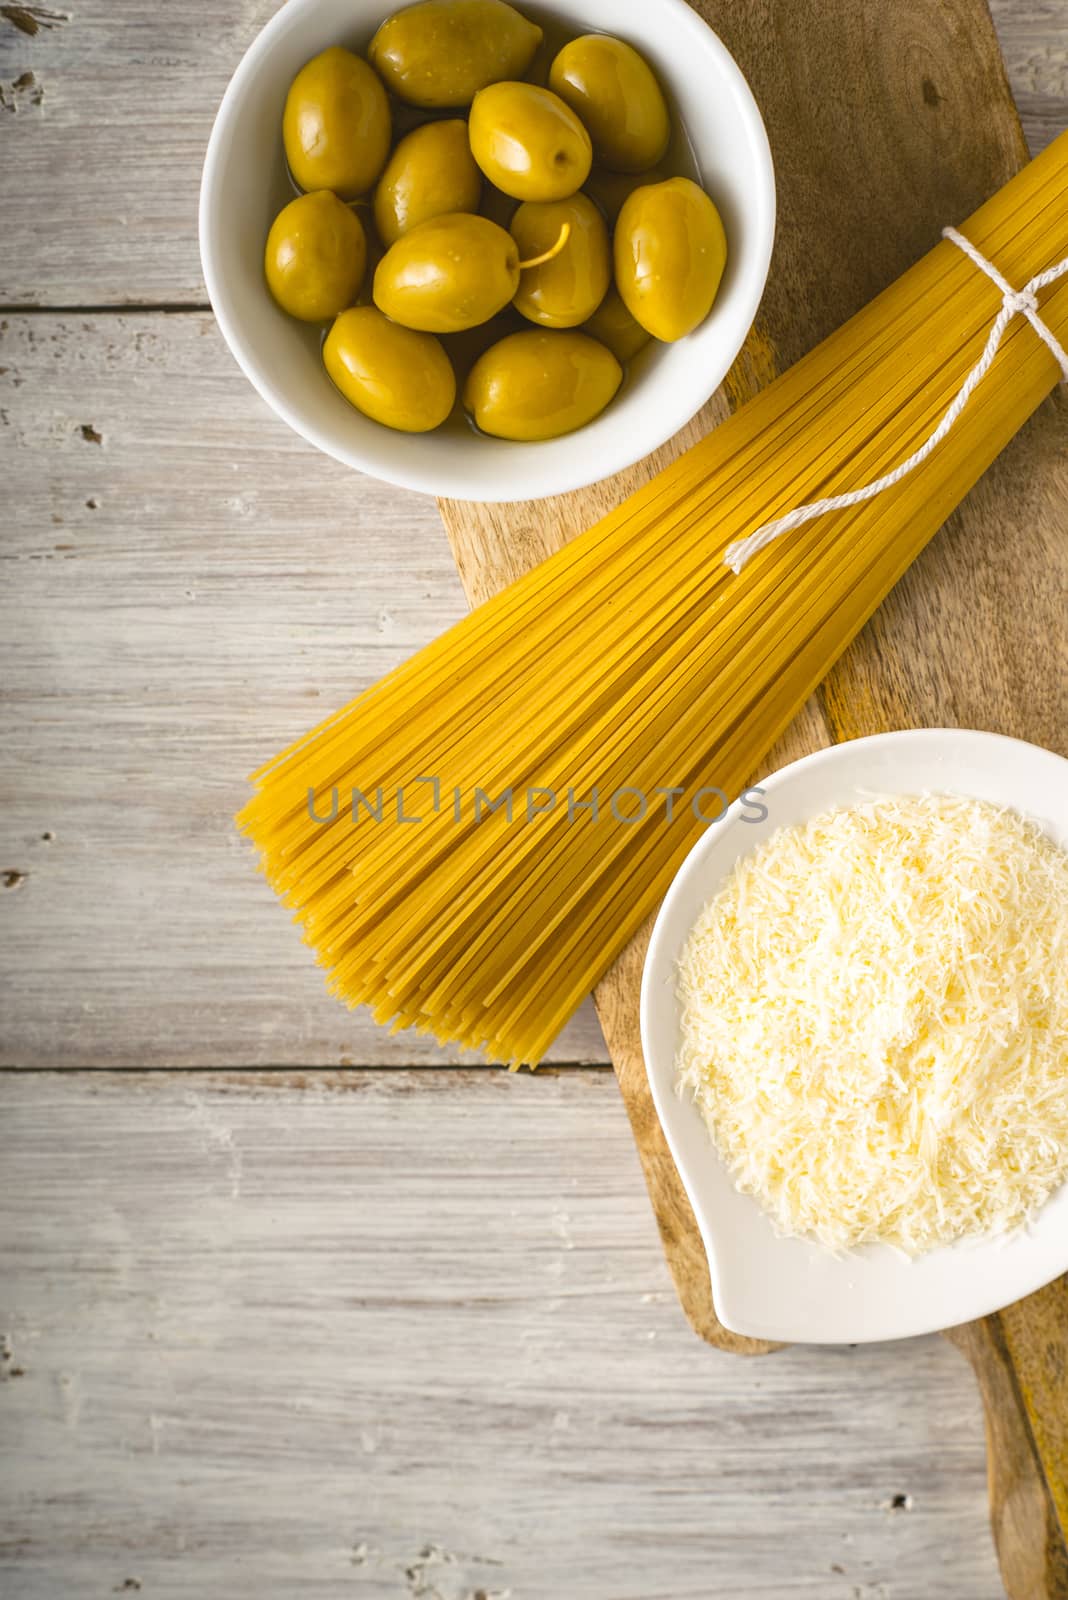 Raw spaghetti with olives and cheese on the white wooden table vertical